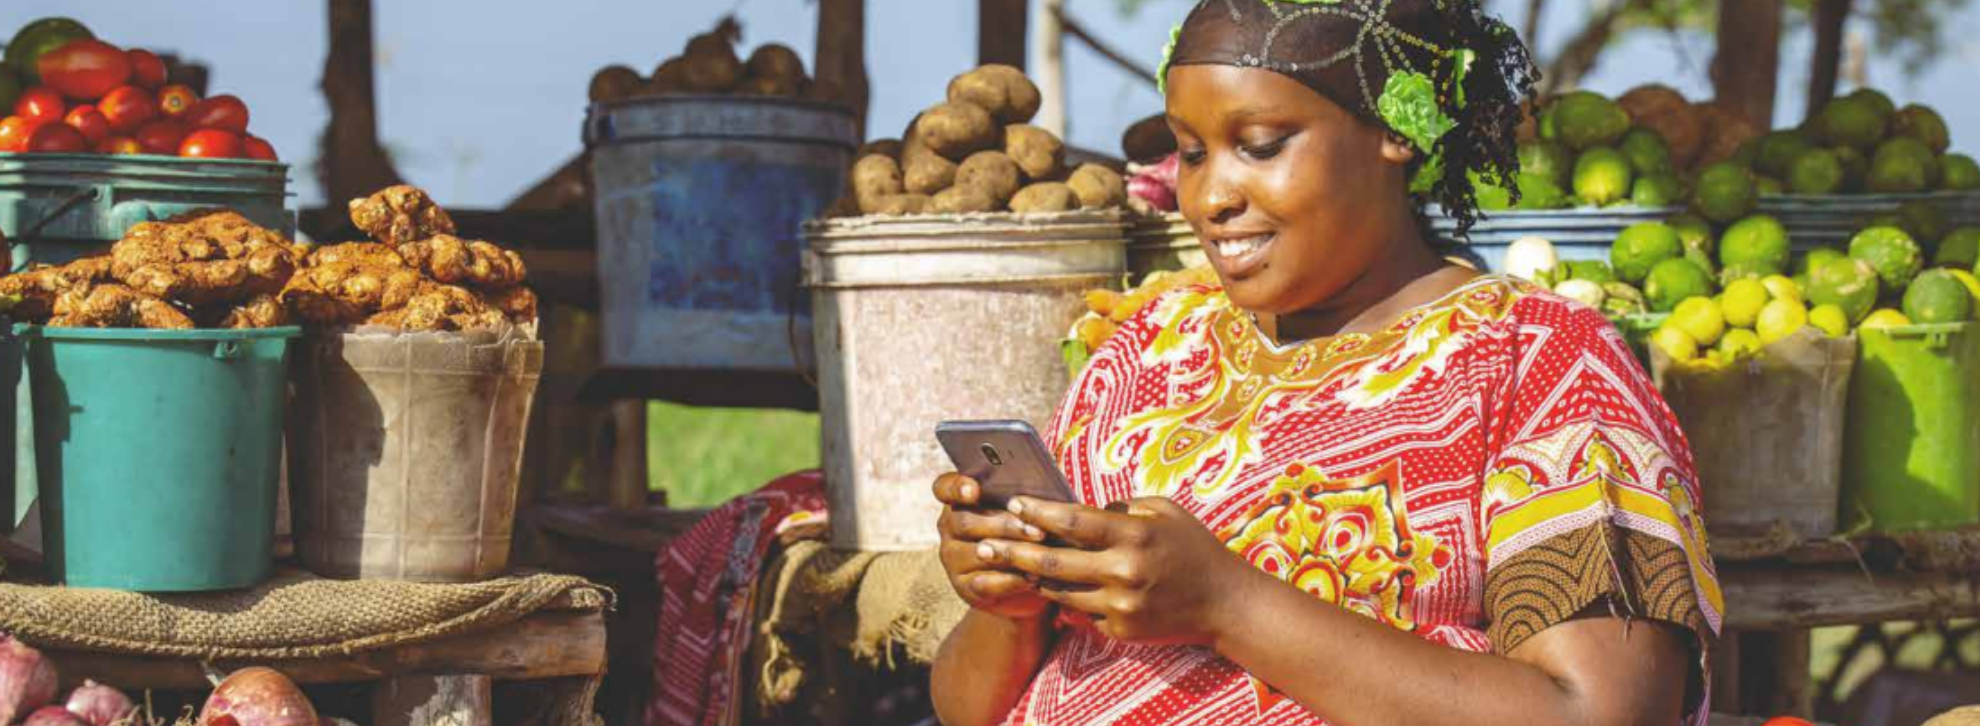 Woman using smartphone at a vibrant fruit and vegetable market stall, showcasing GSMA Mobile Innovation Hub technology.